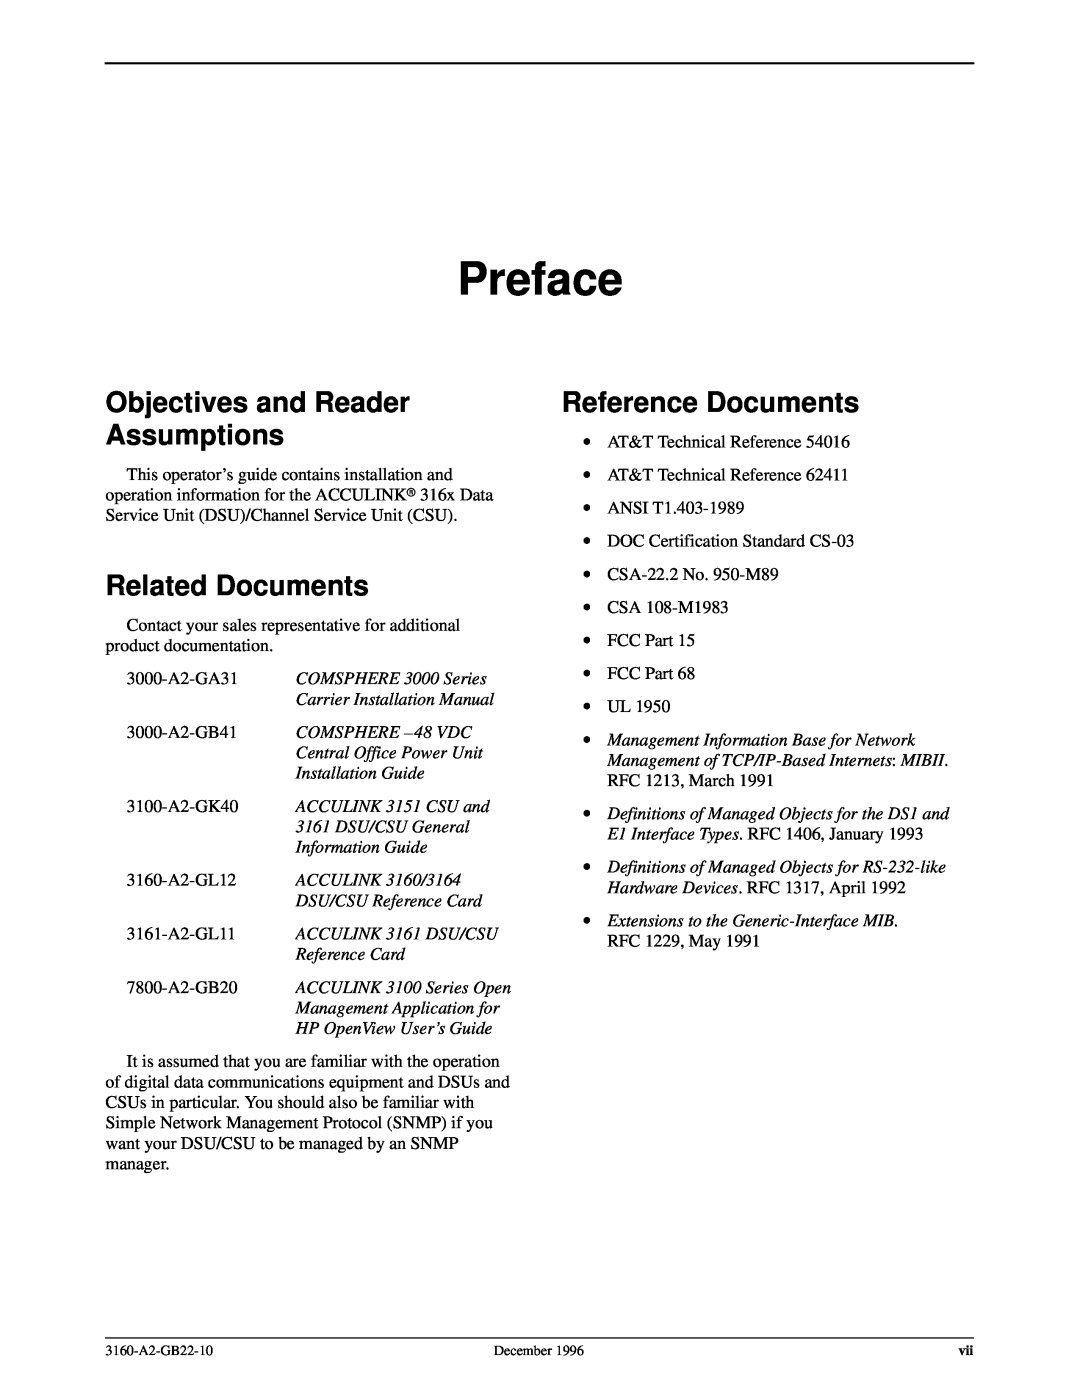 Paradyne 316x Preface, Objectives and Reader Assumptions, Related Documents, Reference Documents, COMSPHERE 3000 Series 